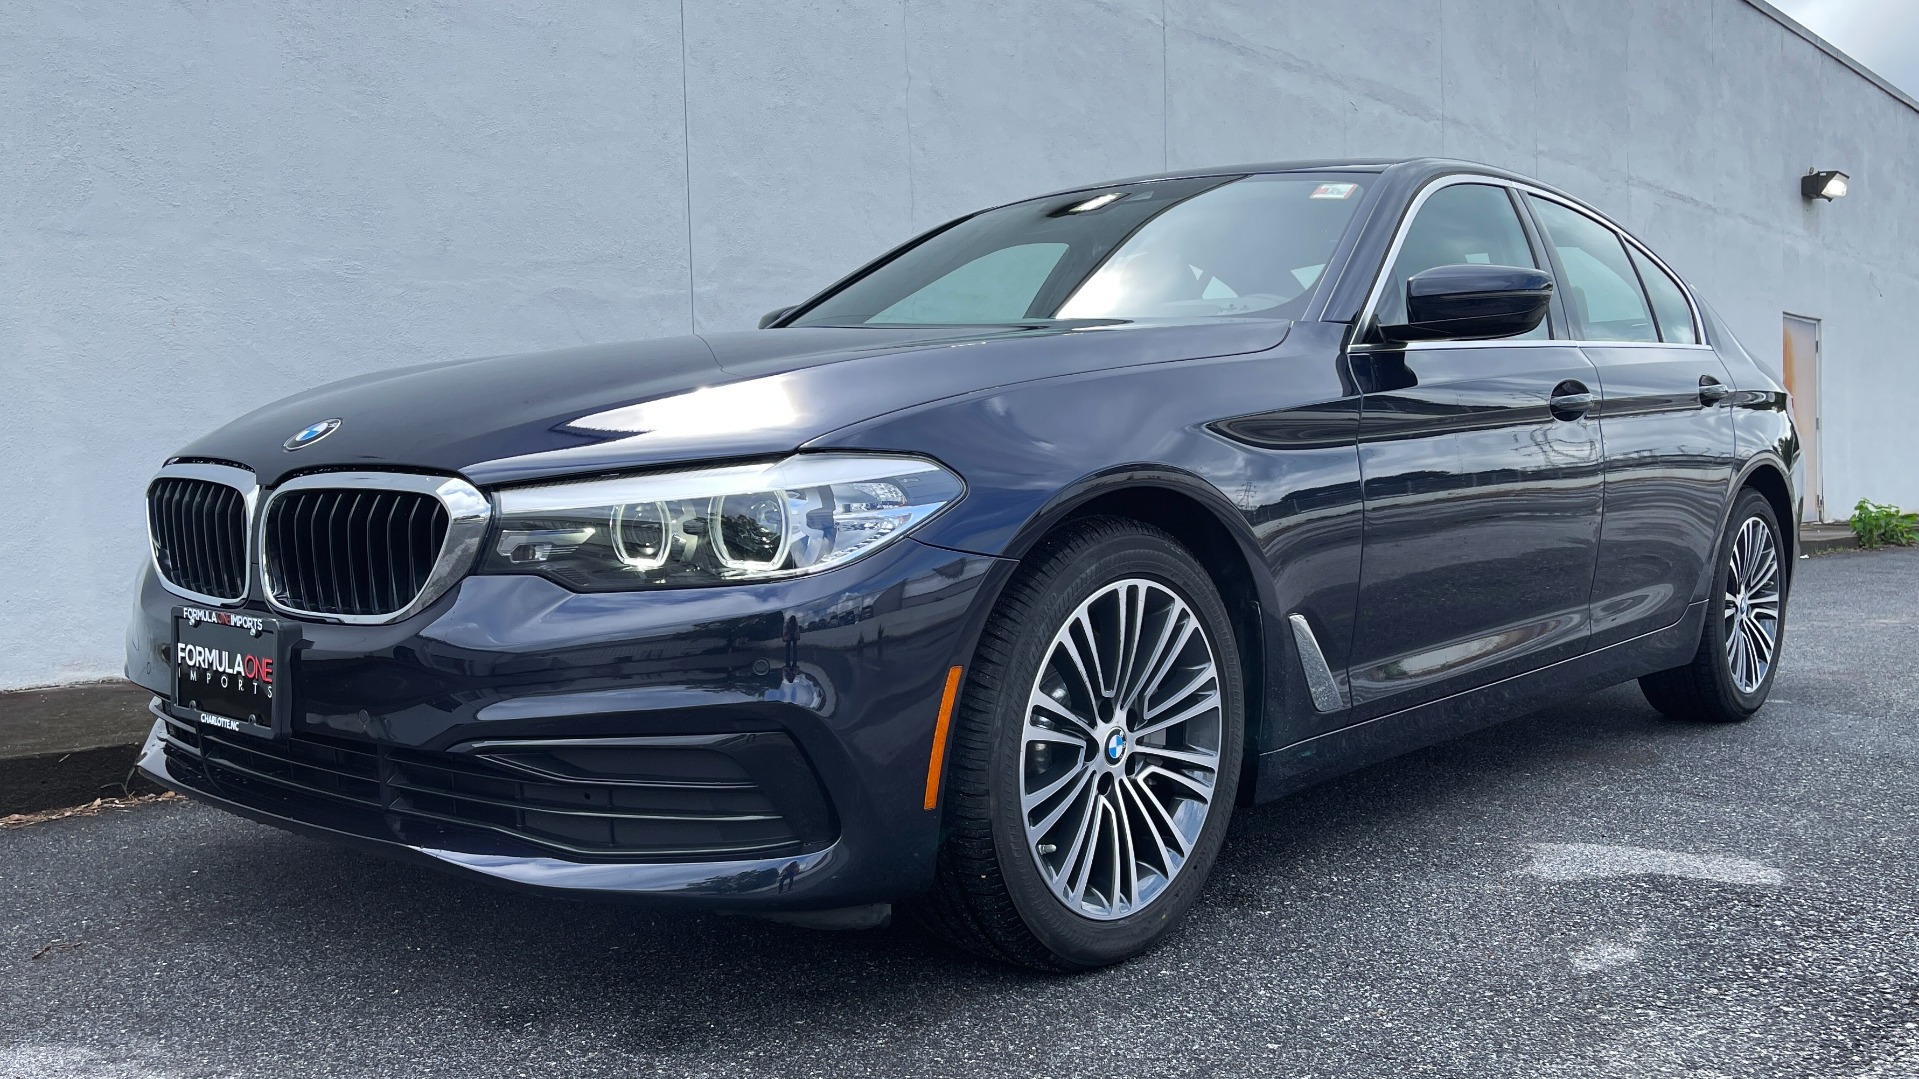 Used 2019 BMW 5 SERIES 530I XDRIVE / CONV PKG / NAV / HUD / HTD STS / SUNROOF / REARVIEW for sale Sold at Formula Imports in Charlotte NC 28227 1